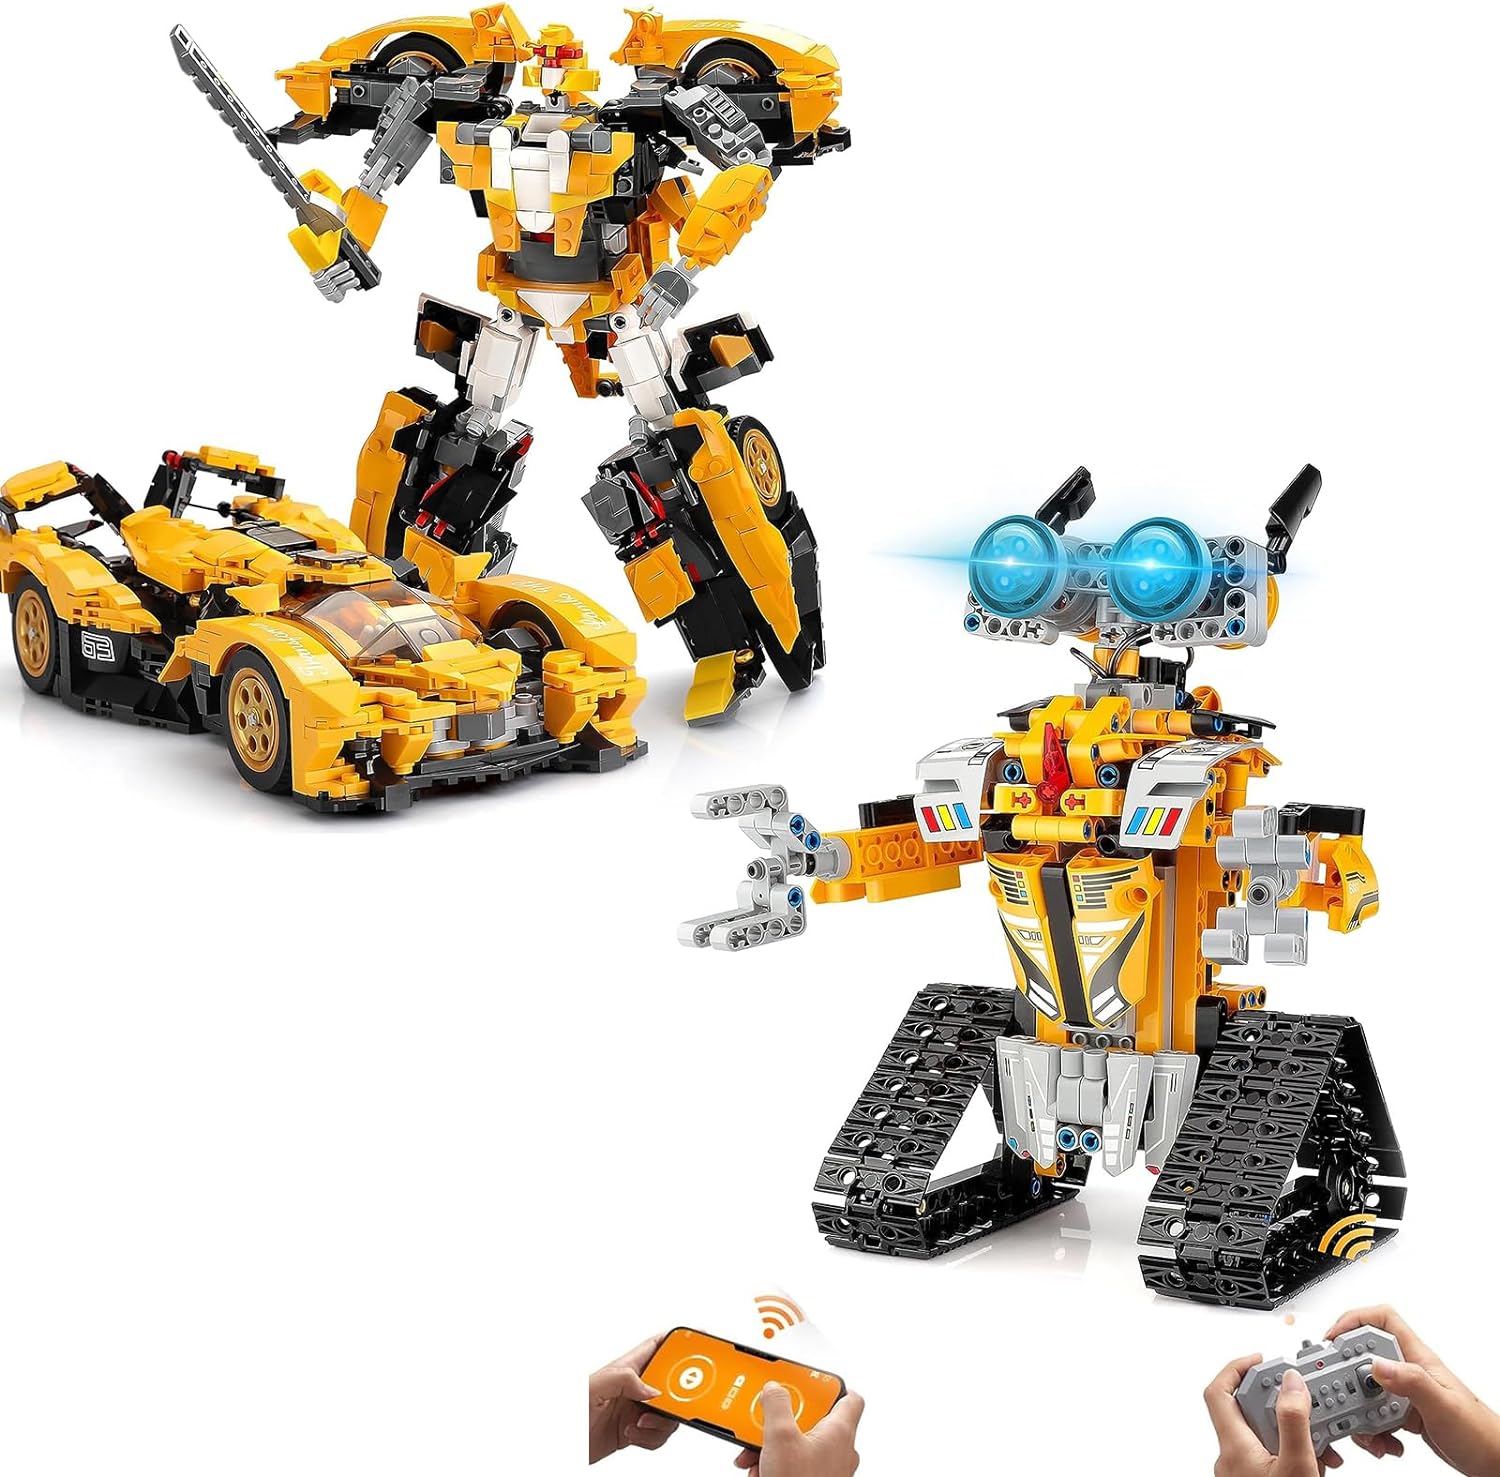 Sillbird Bundle - 2 Items: Remote & APP Controlled Robot Building kit Toys Gifts for Boys Girls Age 8+, 2in1 Transforming Robot & Technic Racing Car Construction Blocks Kit